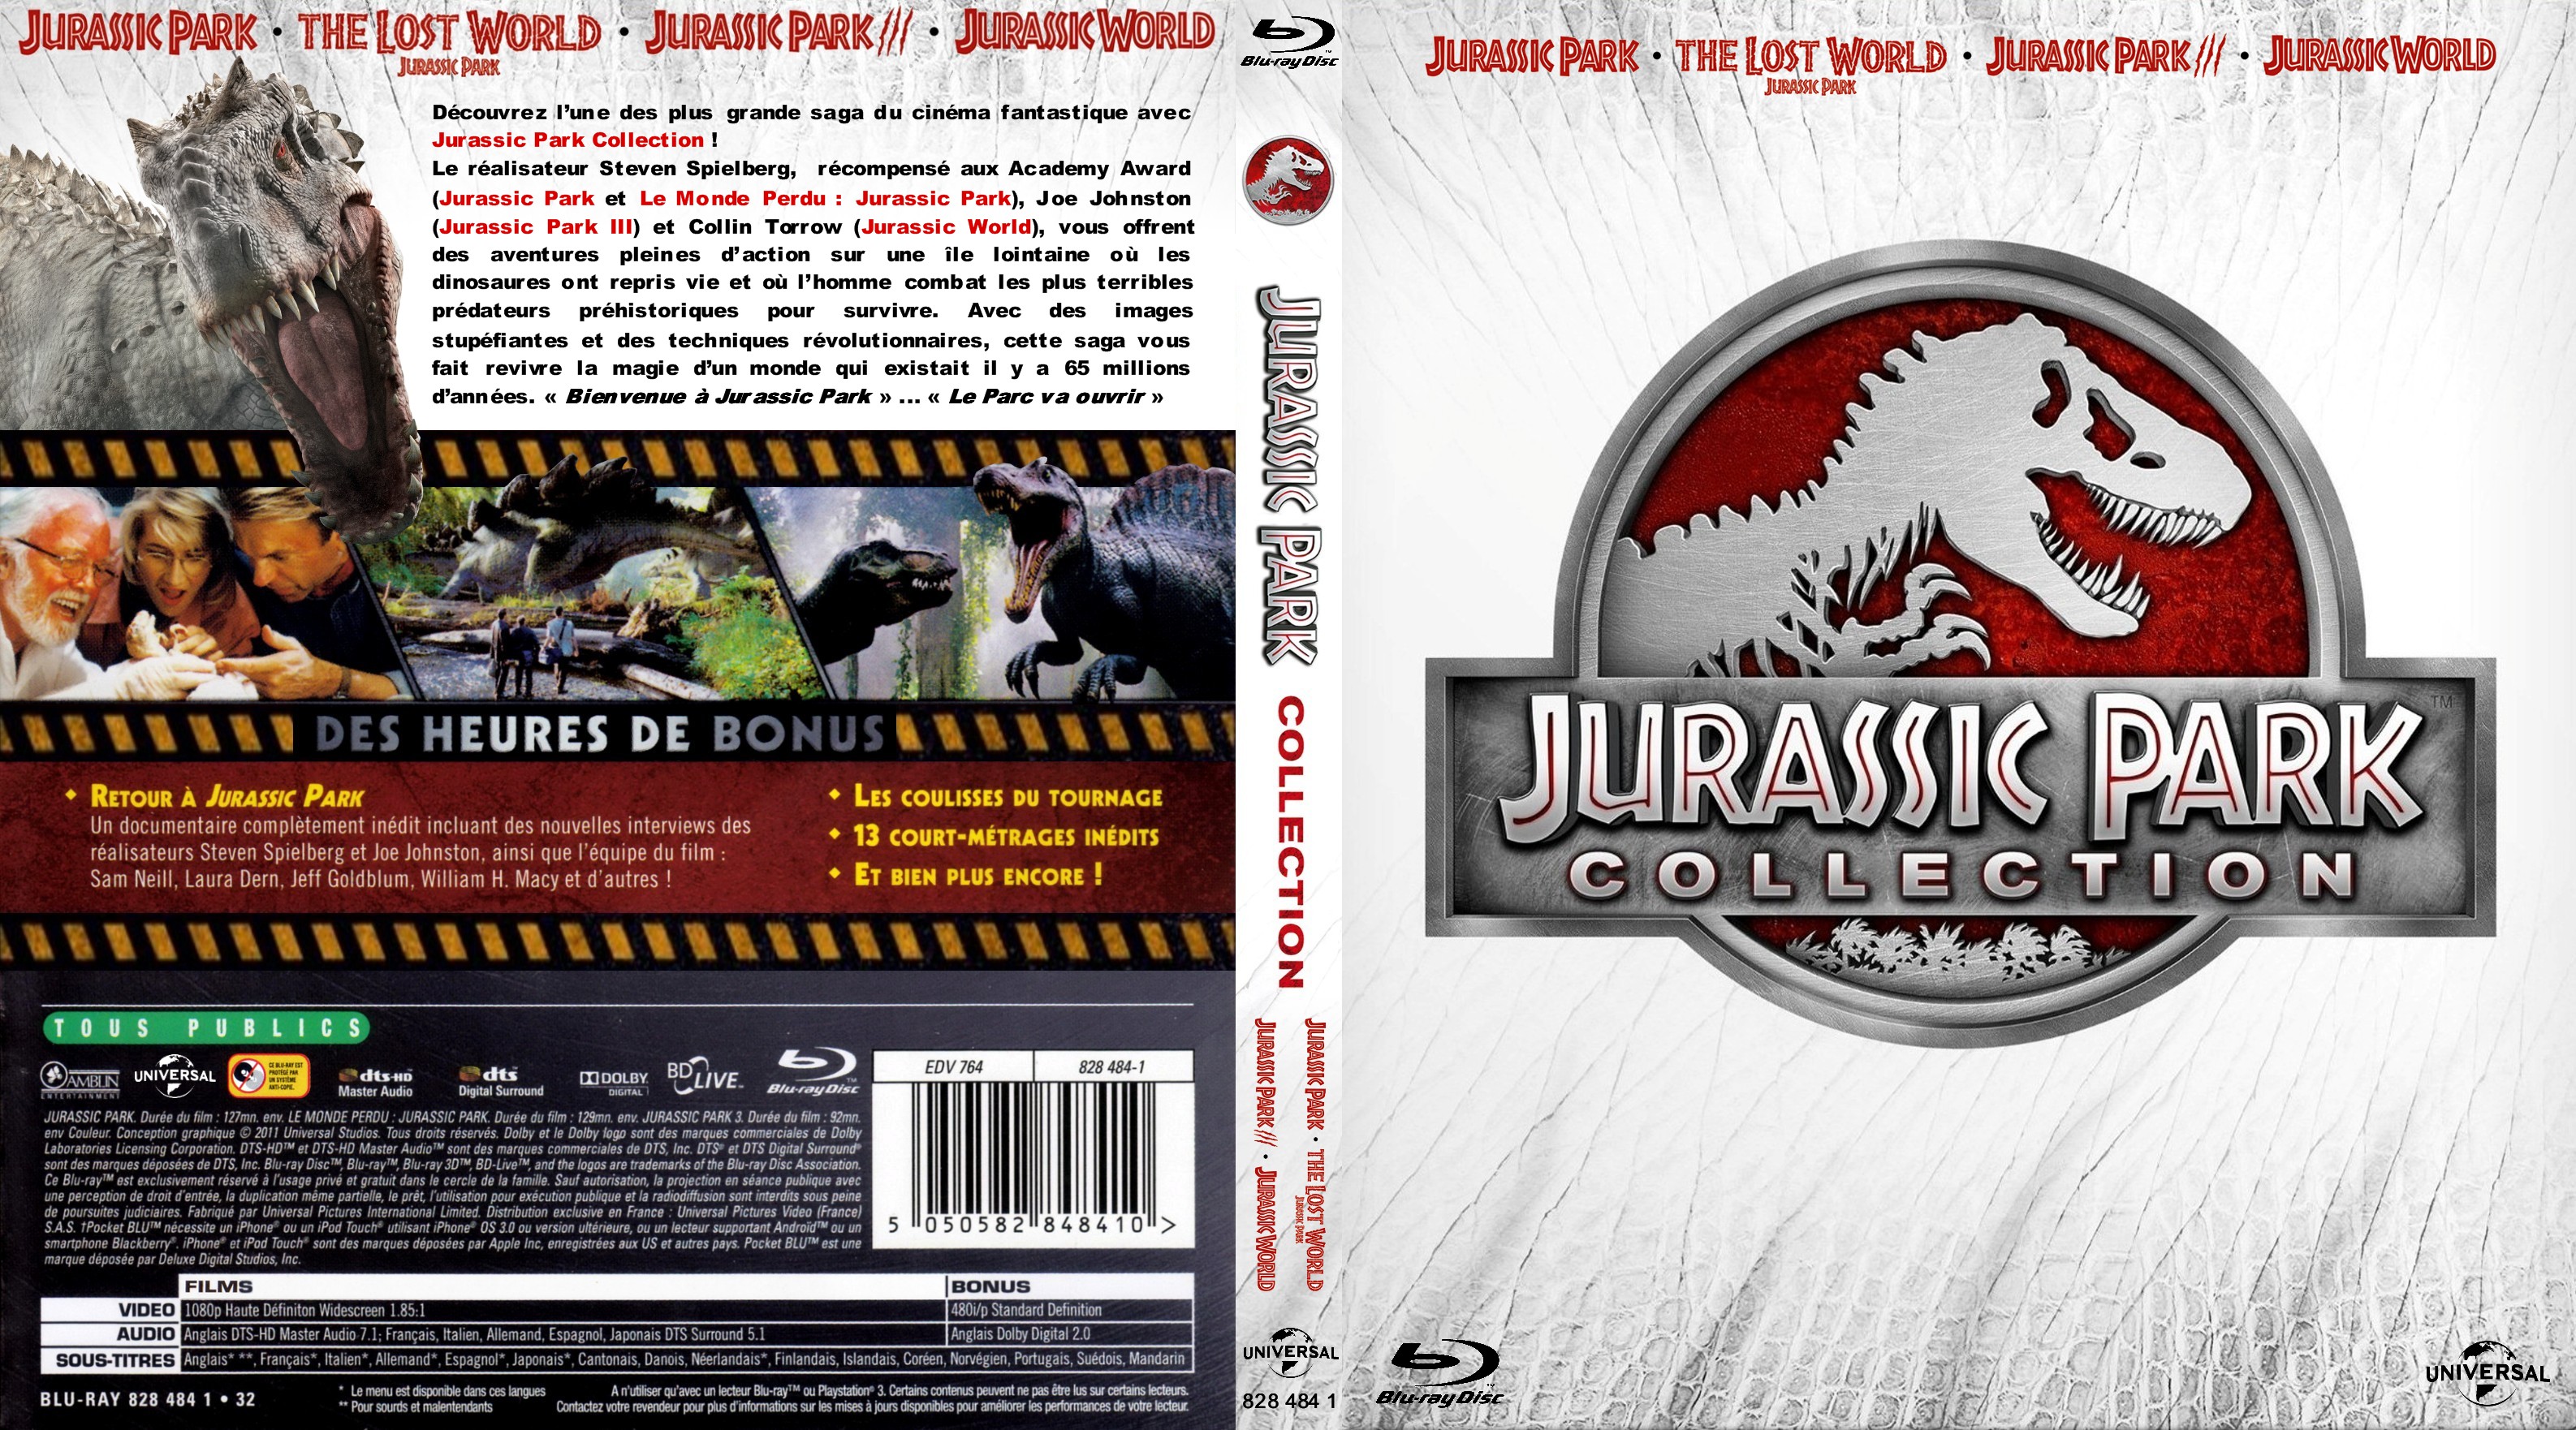 Jaquette DVD Jurassic park collection (BLU-RAY) custom